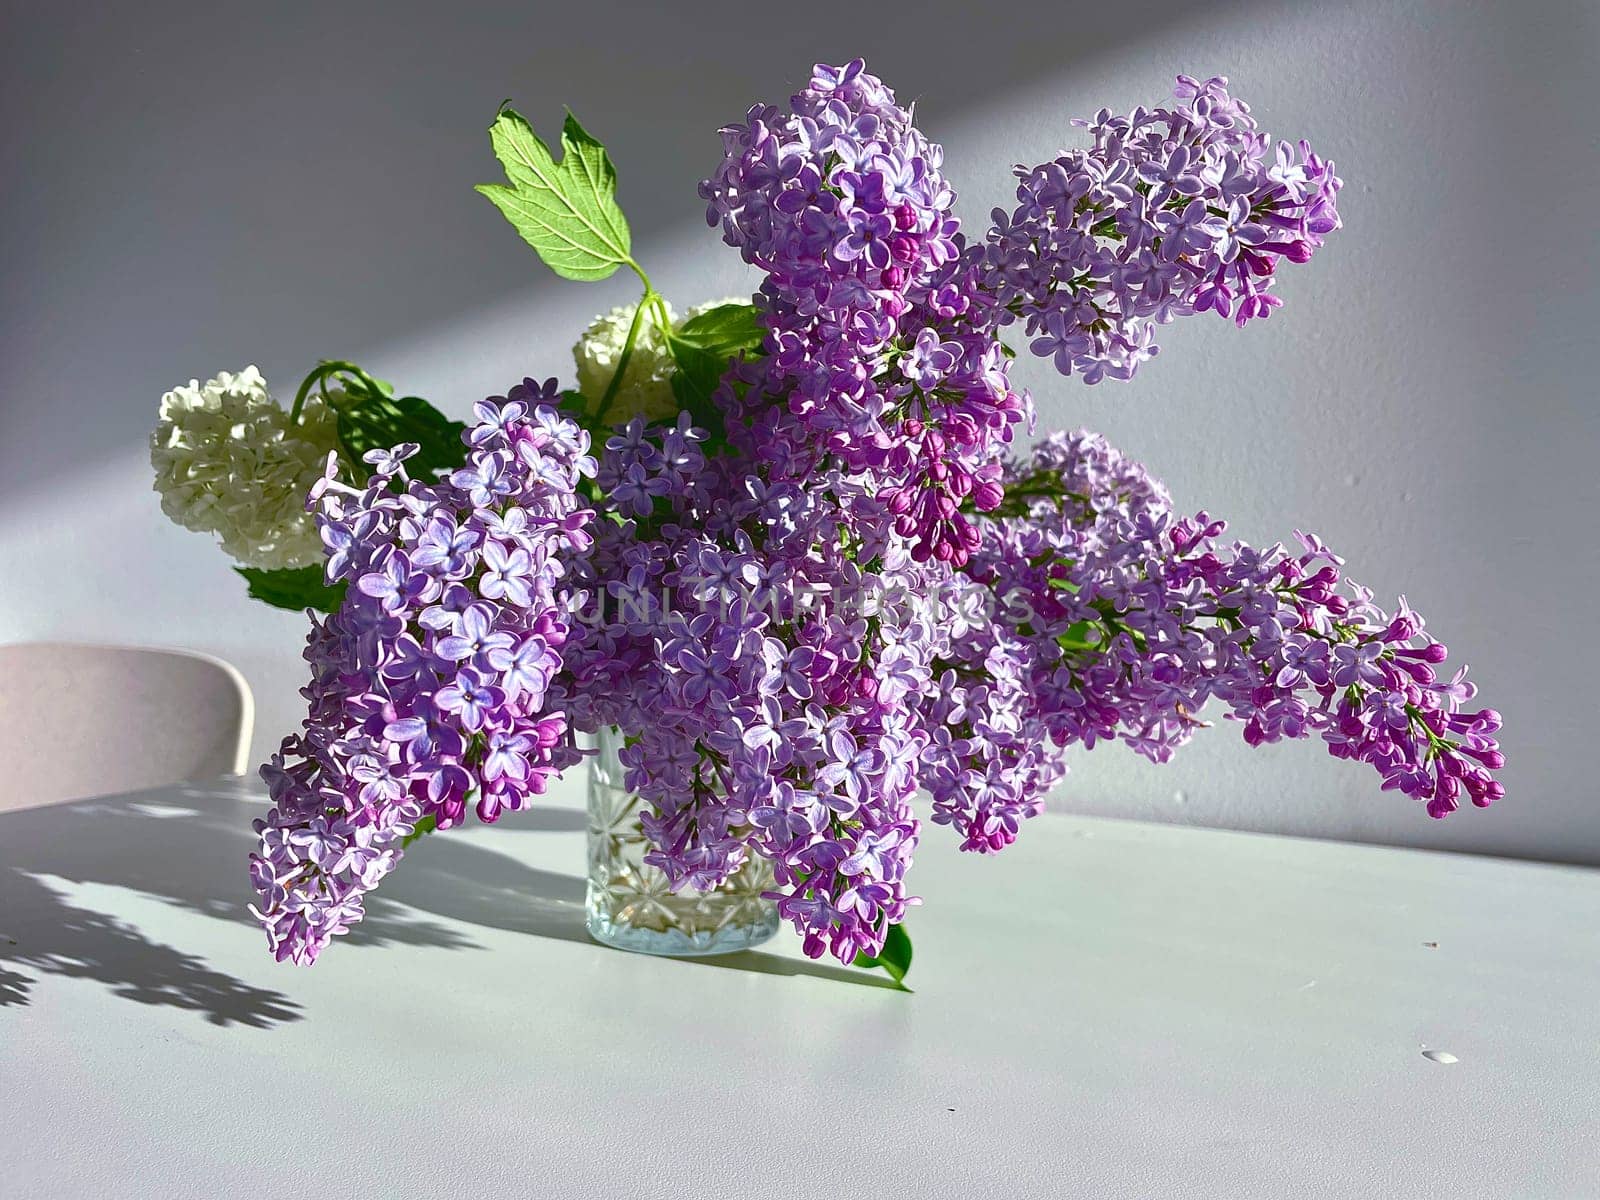 A bouquet of blossoming purple lilac flowers and a white viburnum inflorescence on a gray background. High quality photo